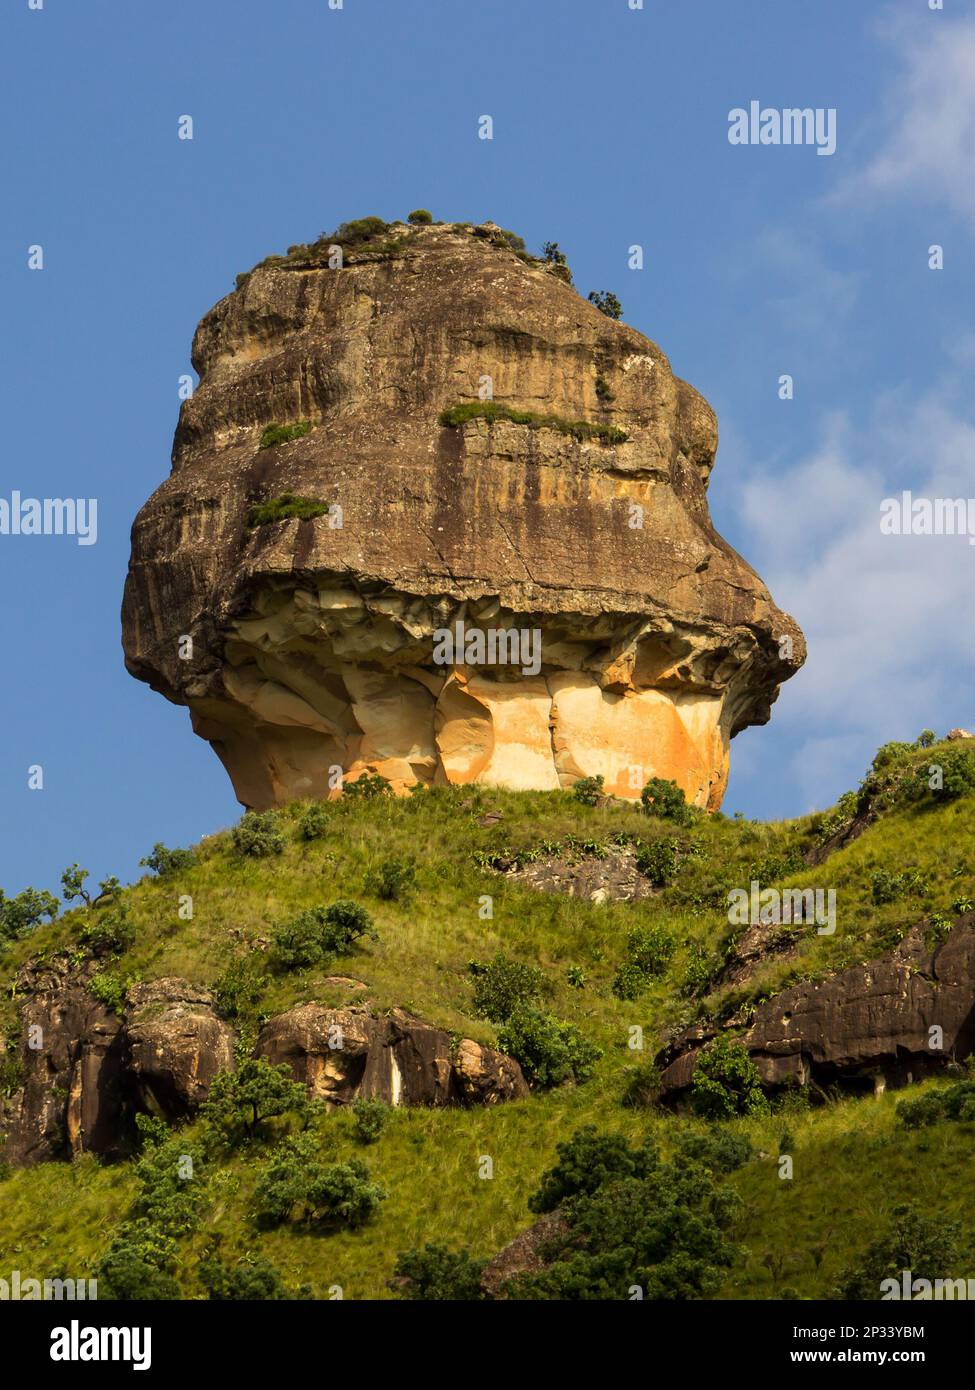 The bizarre sandstone buttress, called Policeman’s Helmet, in the Drakensberg Mountains, Royal Natal national park, South Africa, against a blue sky. Stock Photo